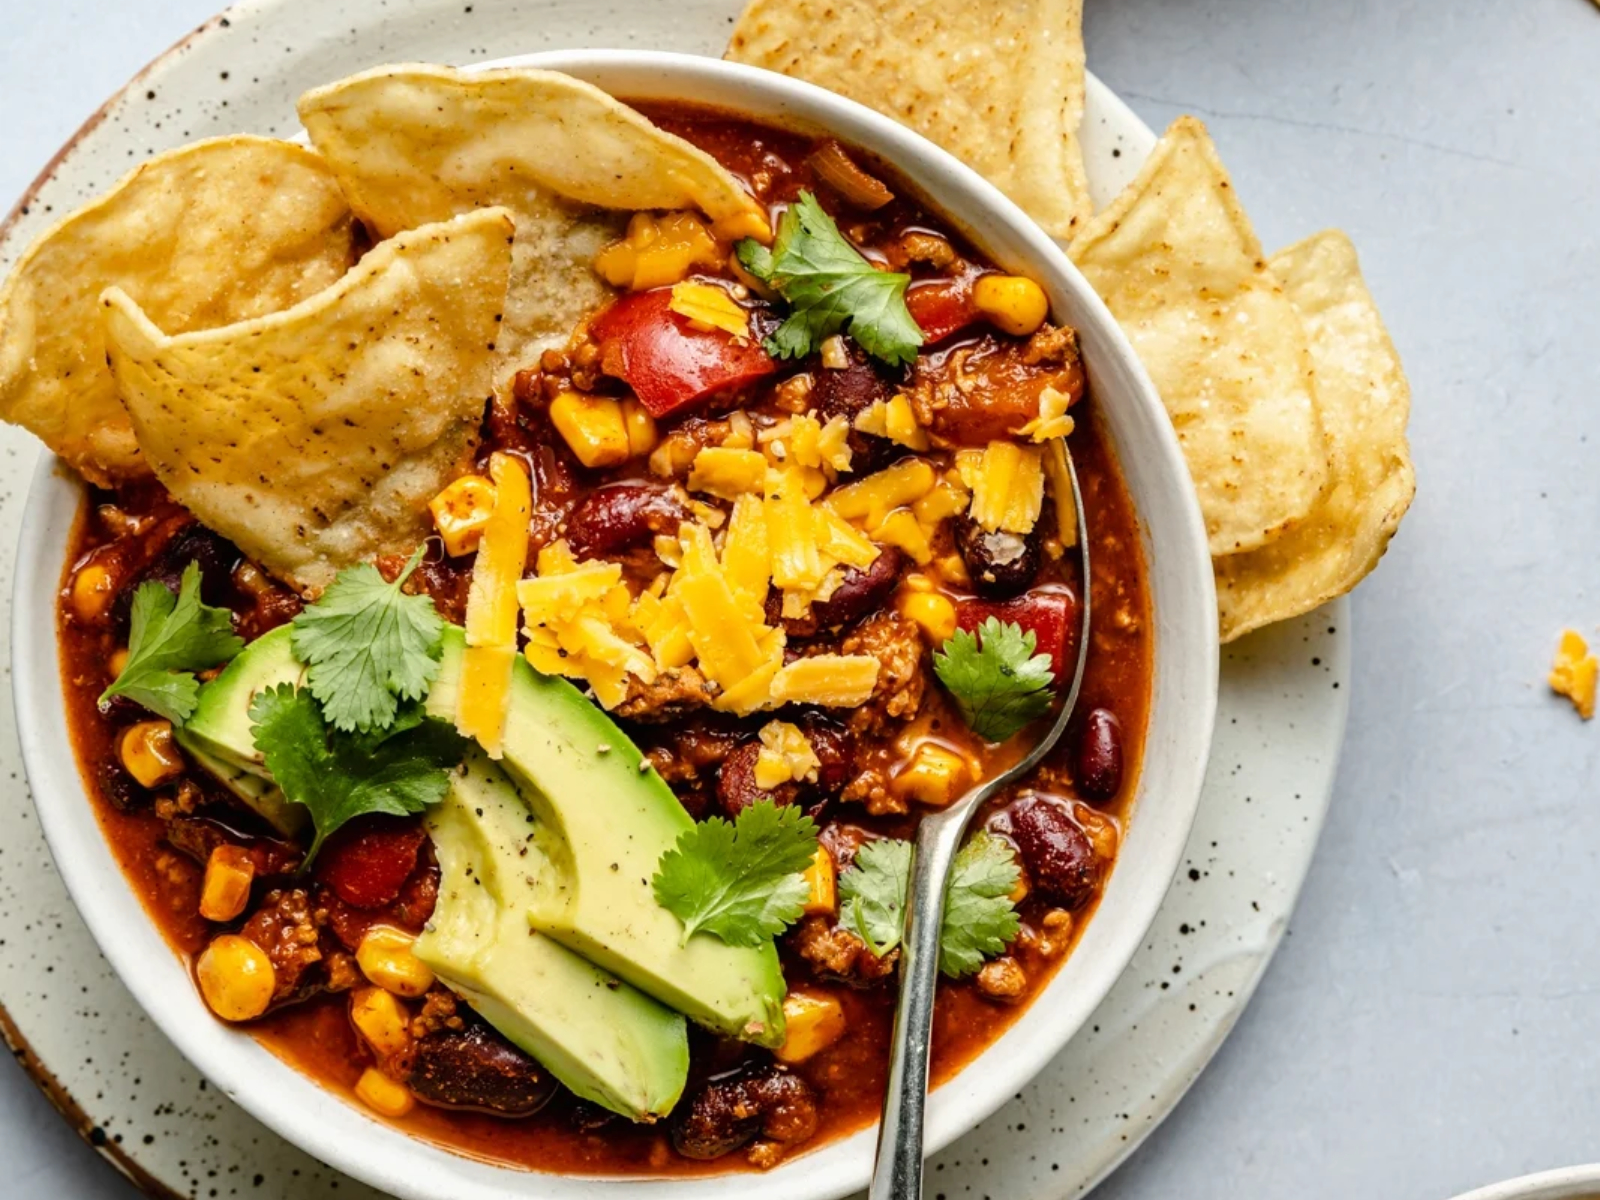 Seriously the Best Healthy Turkey Chili